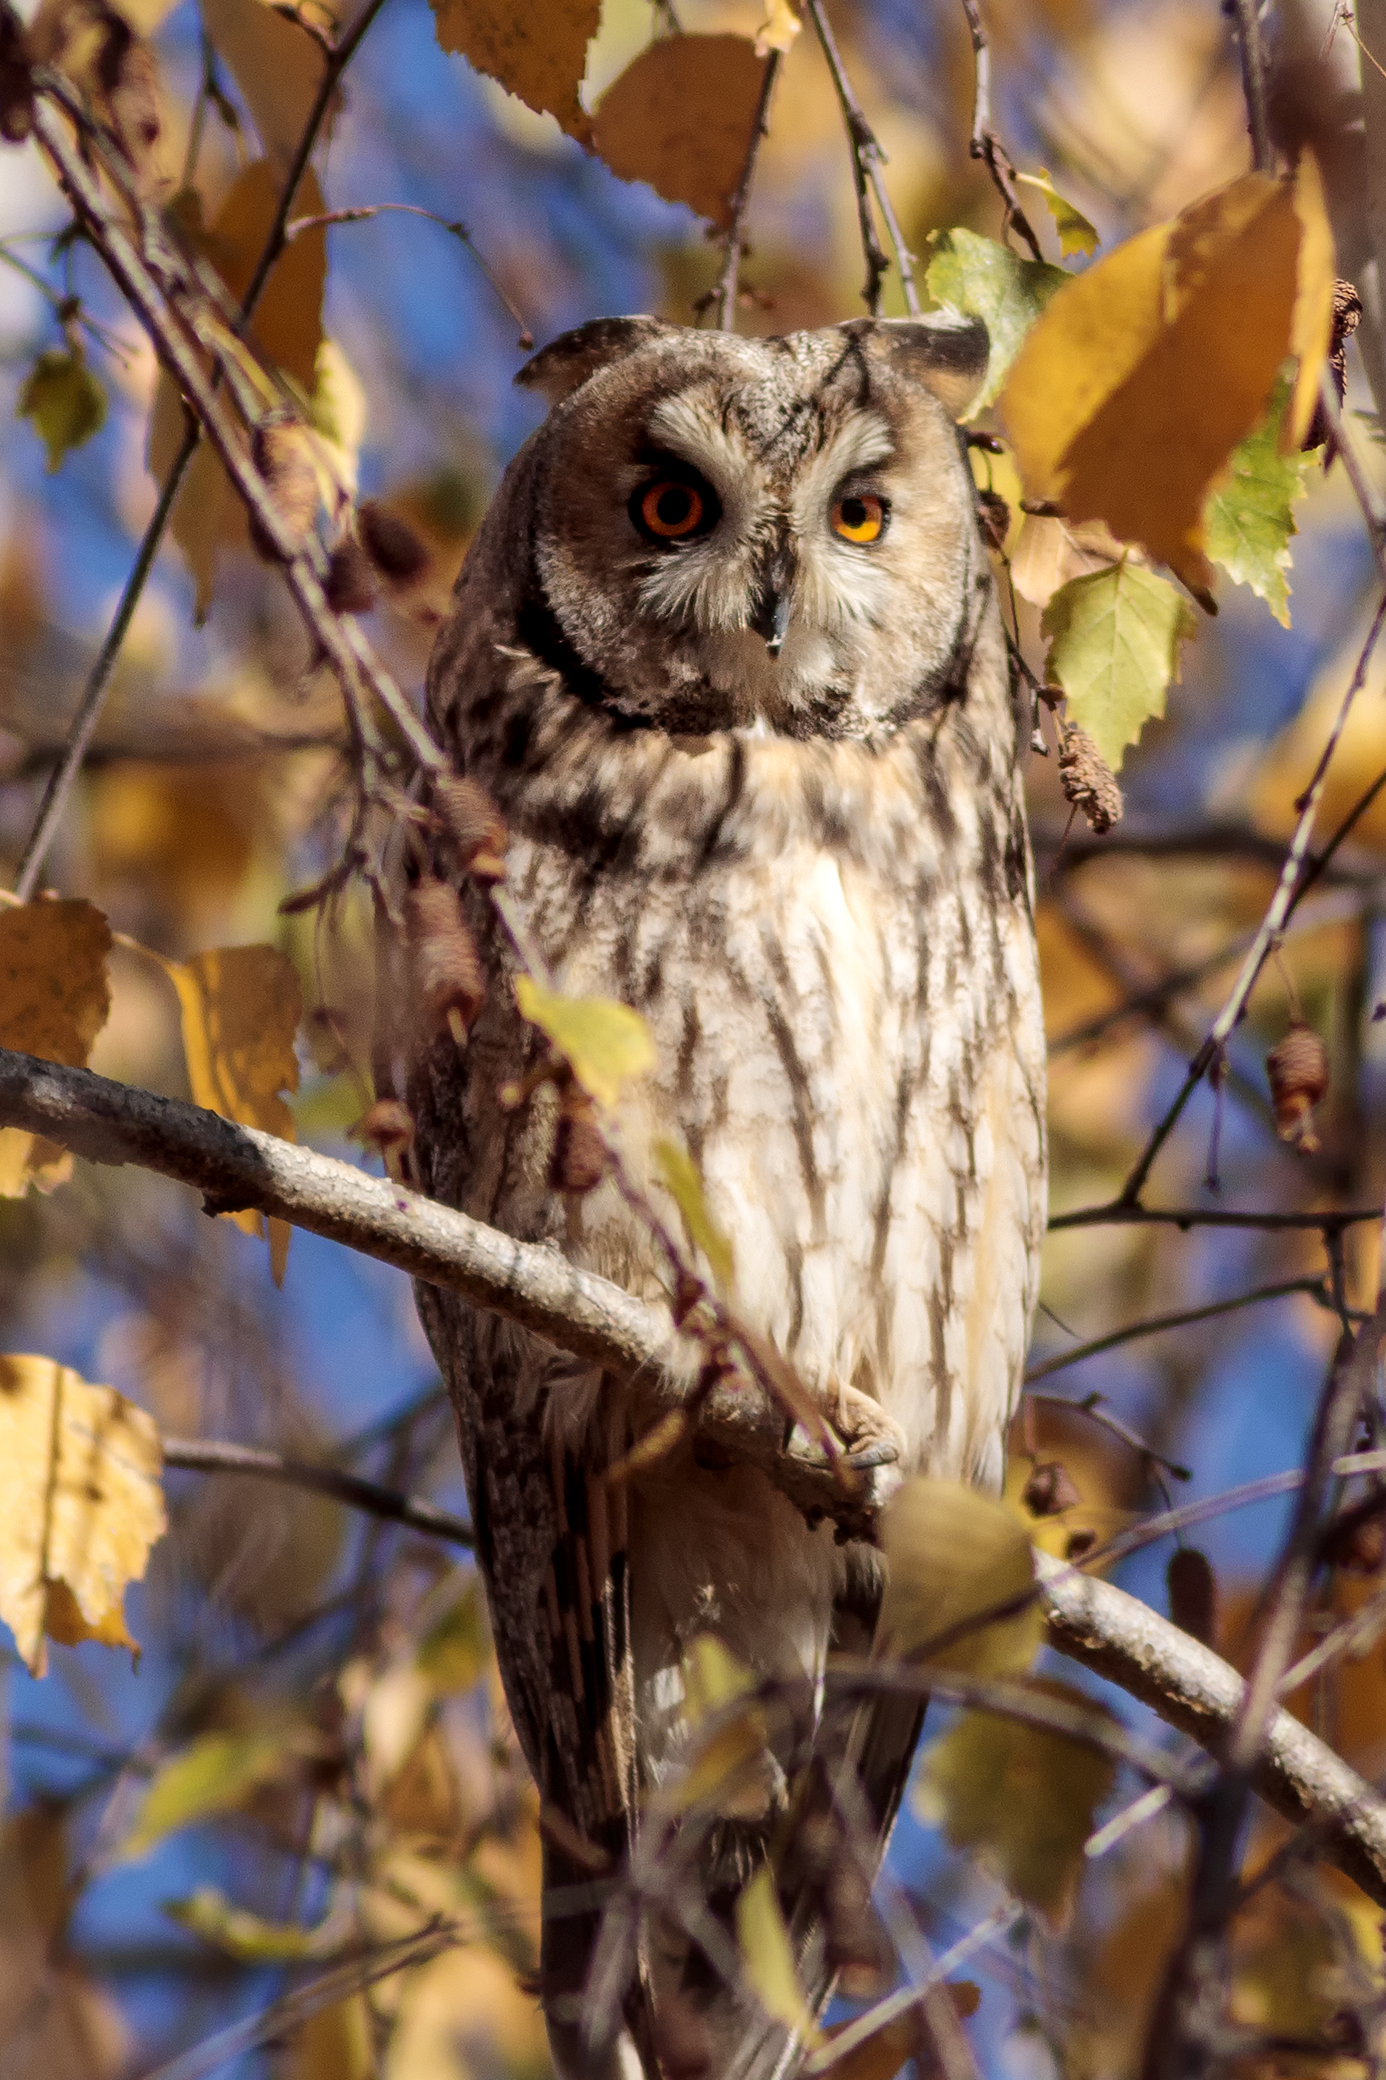 Owl among branches...